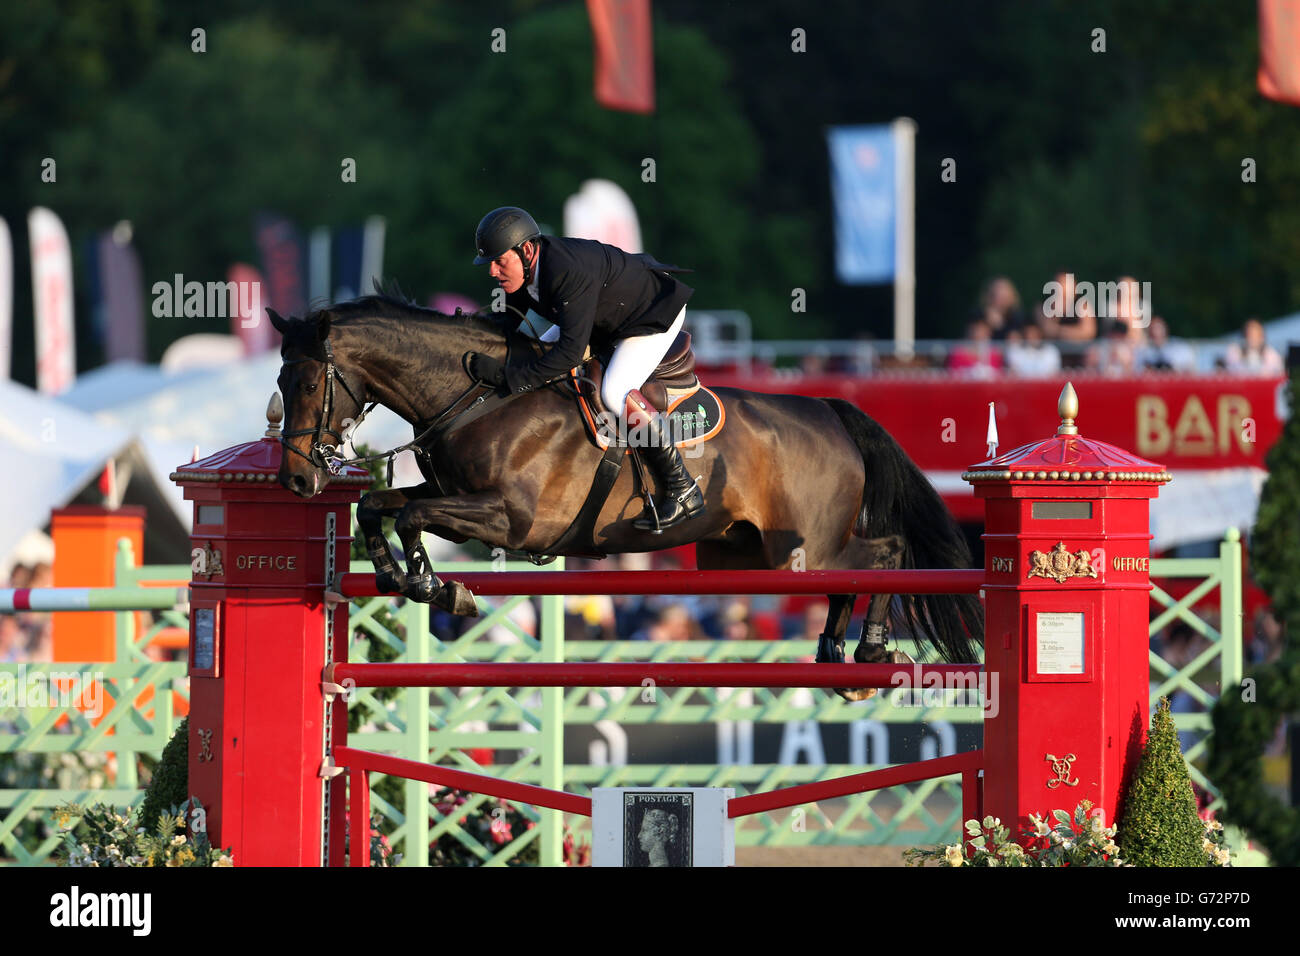 Great Britain's Tim Stockdale riding Fresh Direct Kalico Bay competes in a show jumping class during the Royal Windsor Horse Show at Windsor Castle, London. Stock Photo